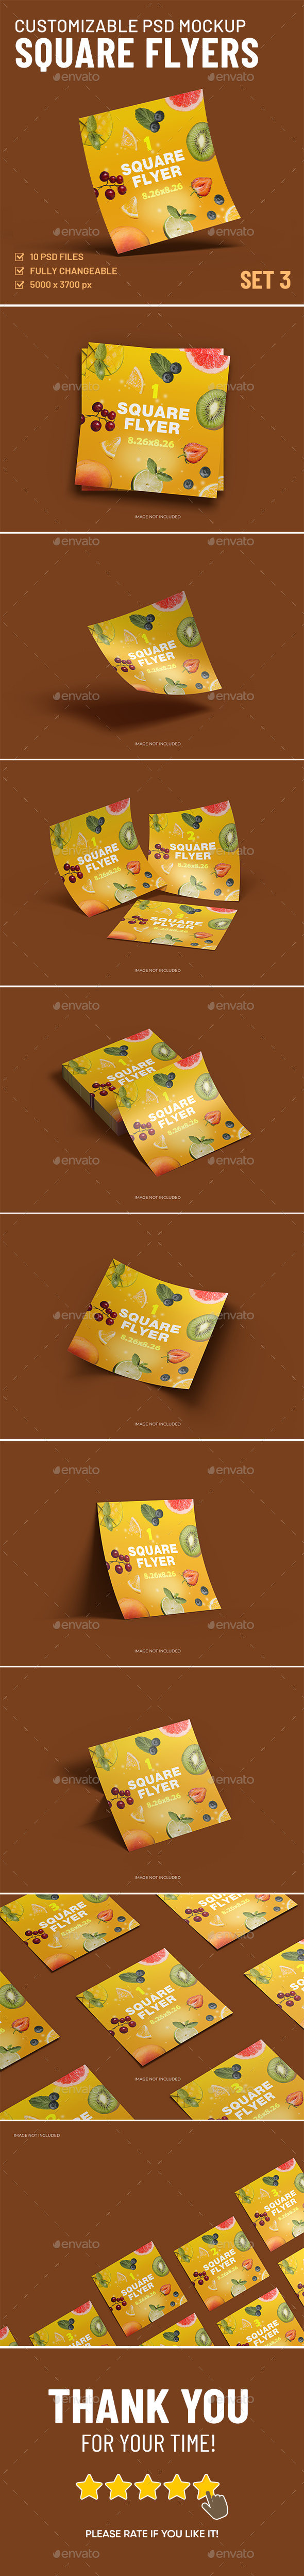 [DOWNLOAD]Square Sized Flyers. Fully Customizable PSD Mockups